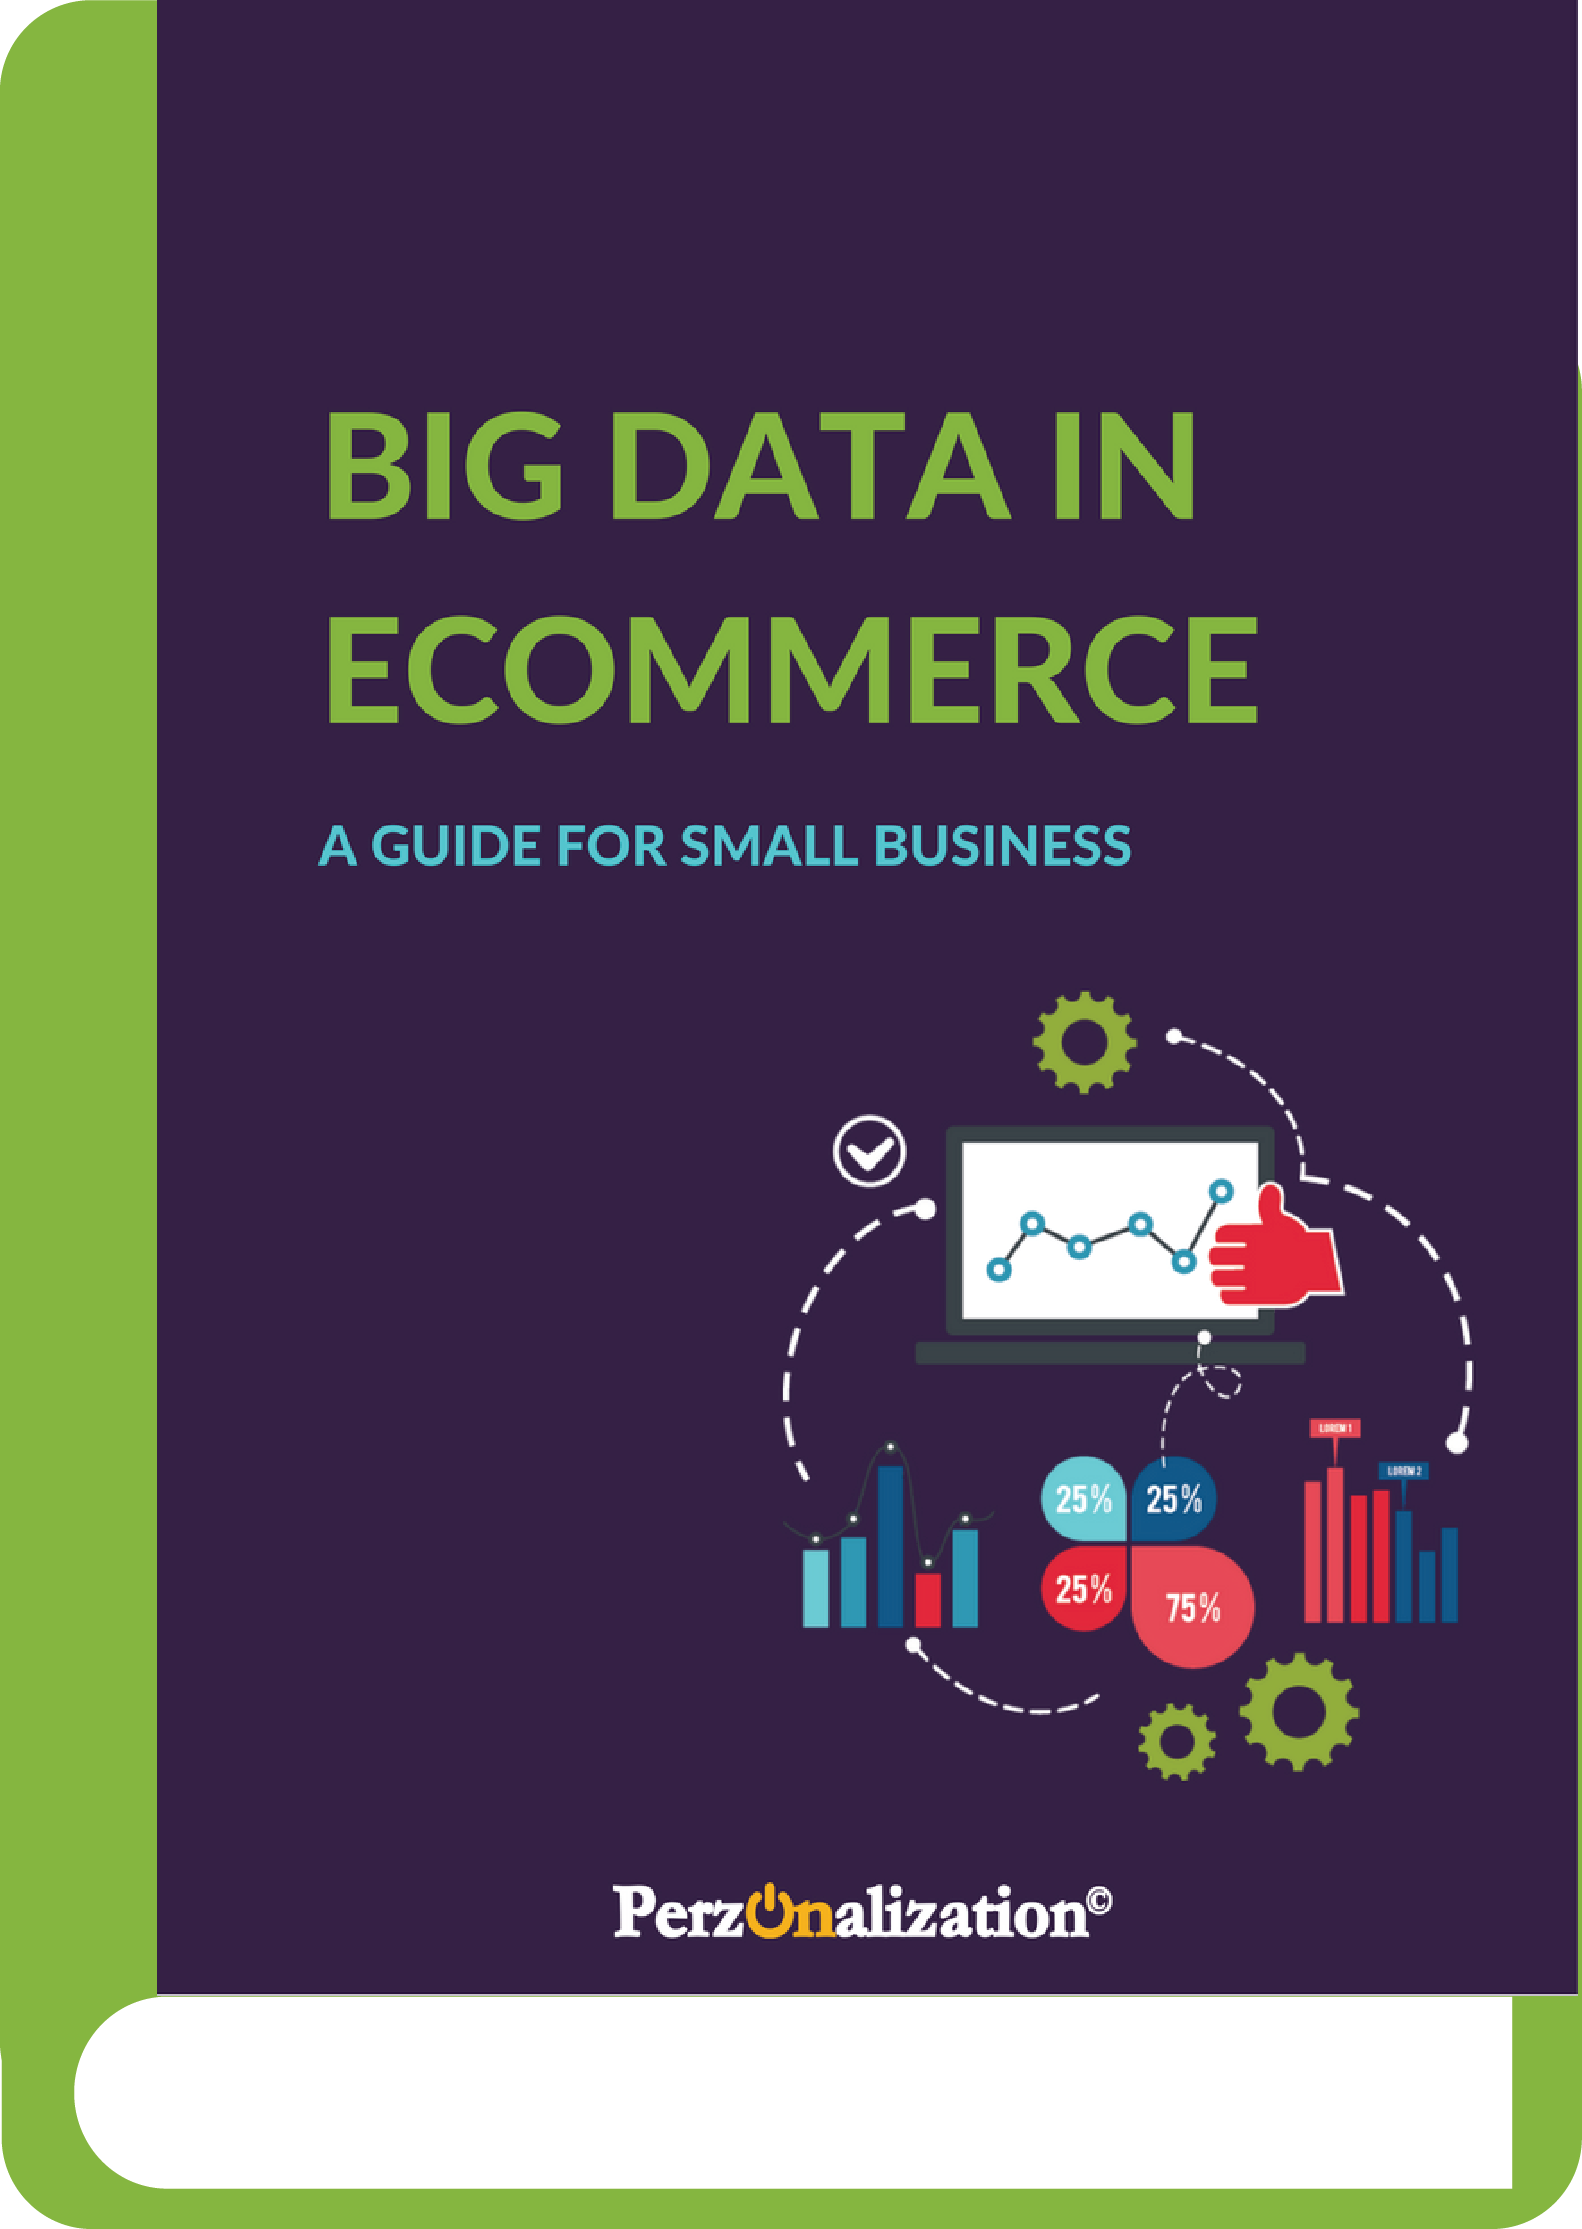 Big data has been a buzzword in today’s business world for the last couple of years and especially in the context of e-commerce.